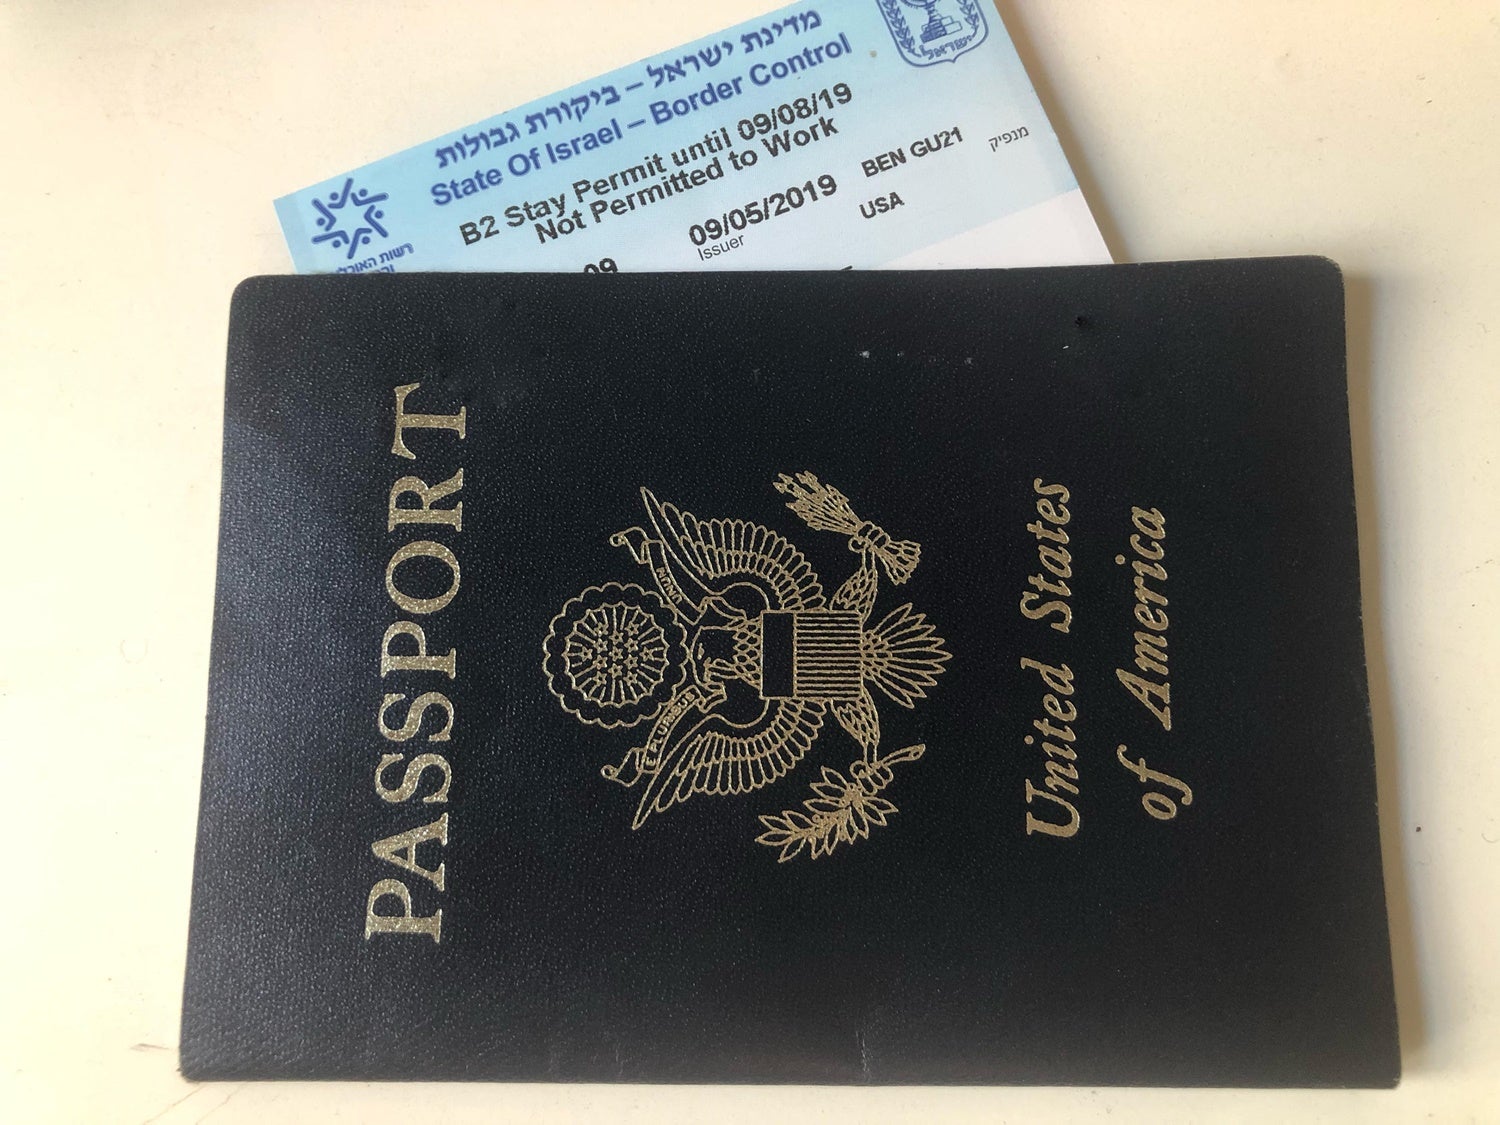 tourist visa from israel to us